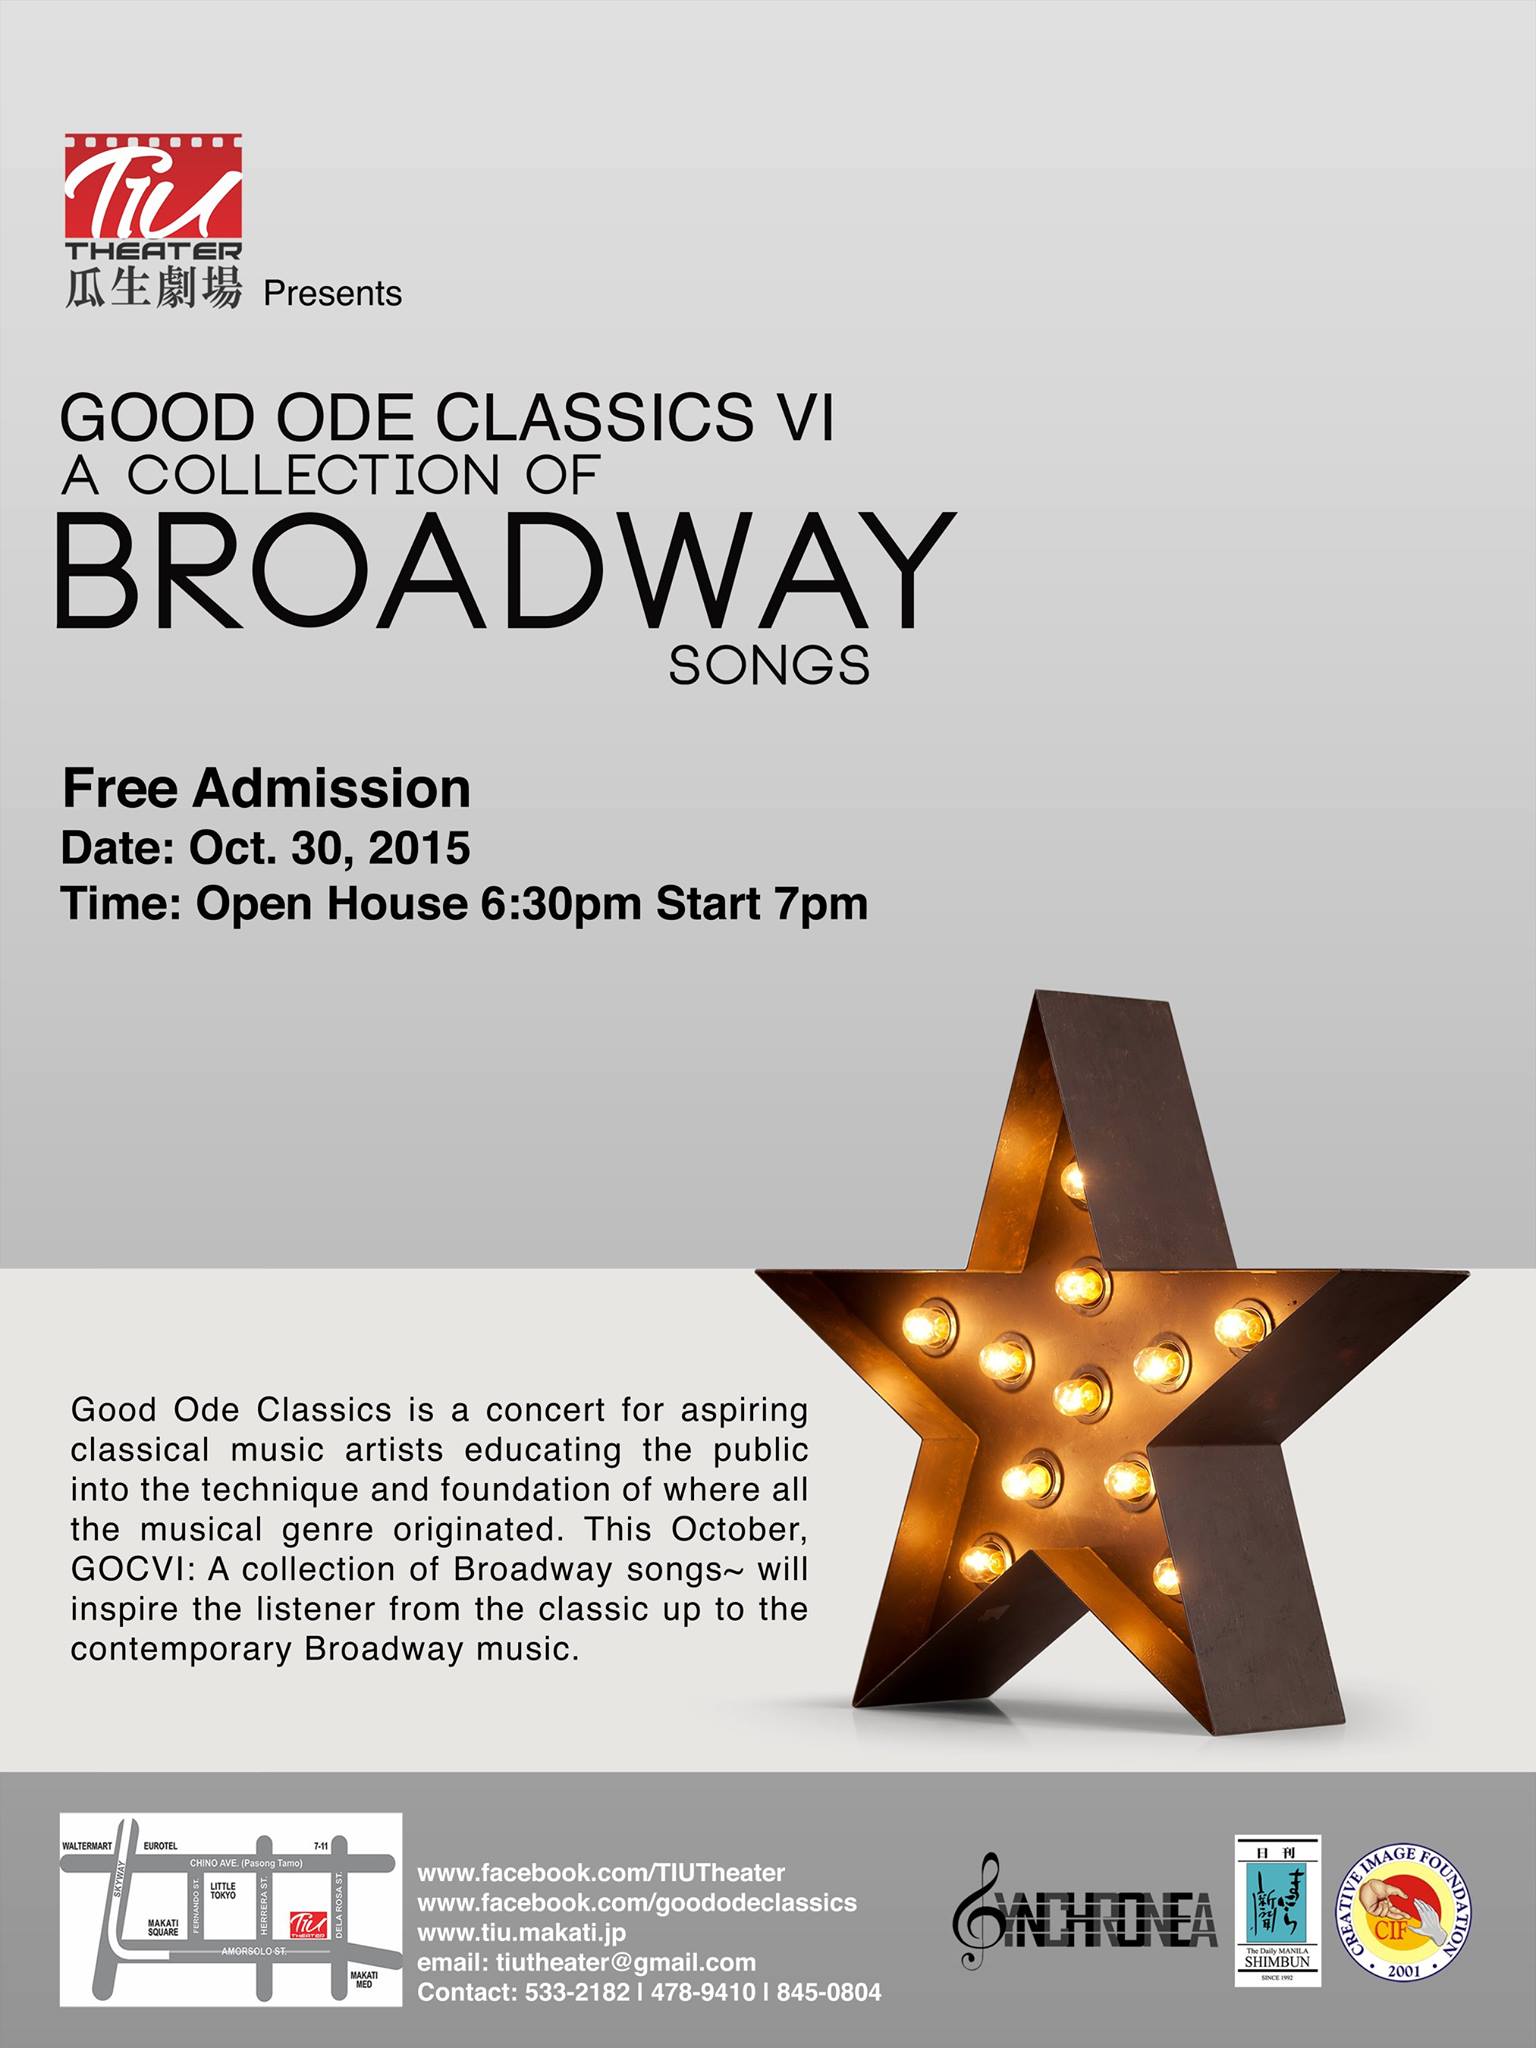 Friday, October 30 TIU Theater We Cordially Invite to Come and Watch Good Ode Classics VI